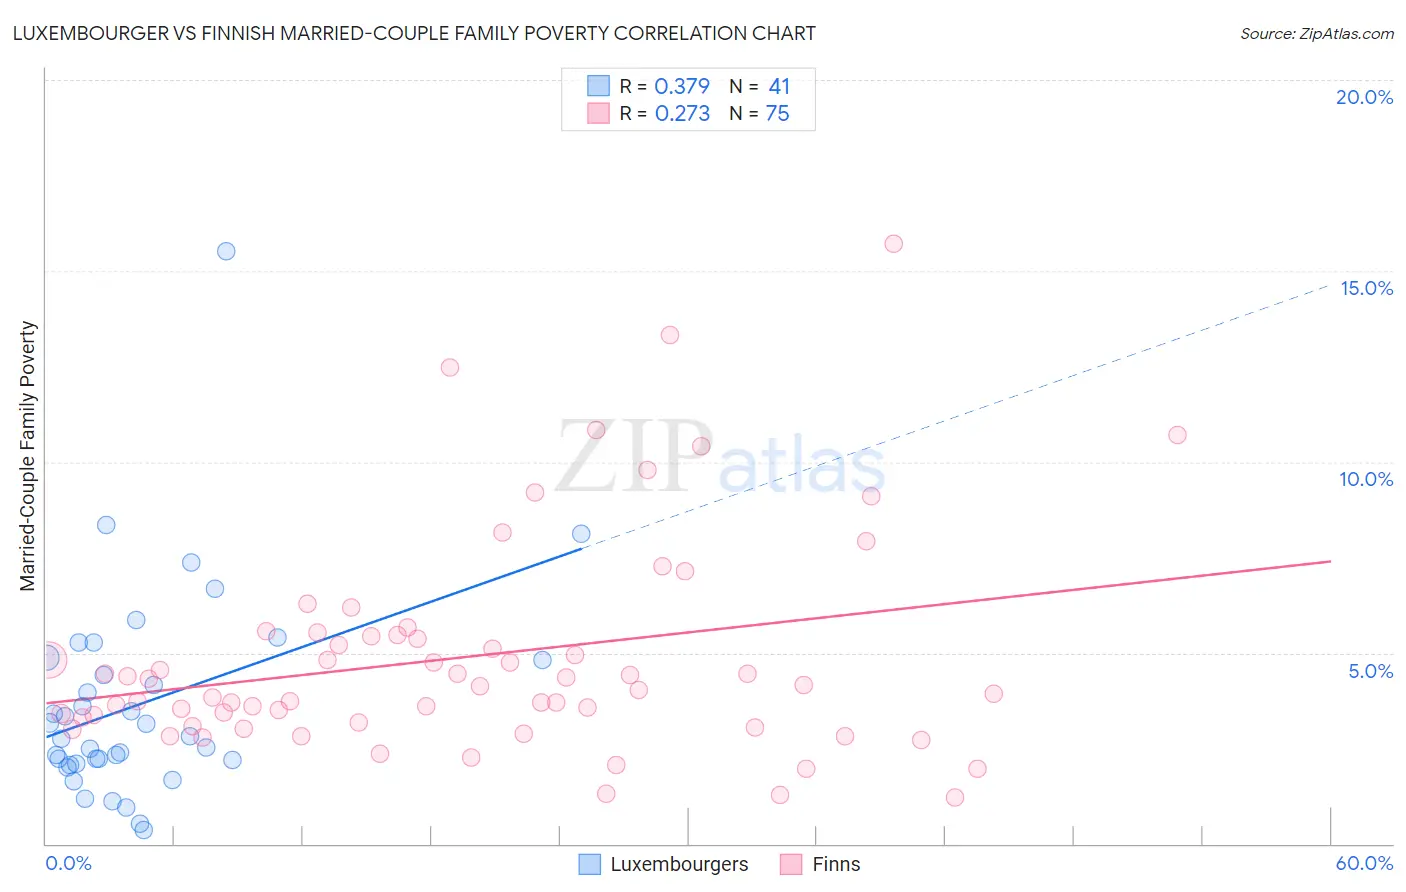 Luxembourger vs Finnish Married-Couple Family Poverty